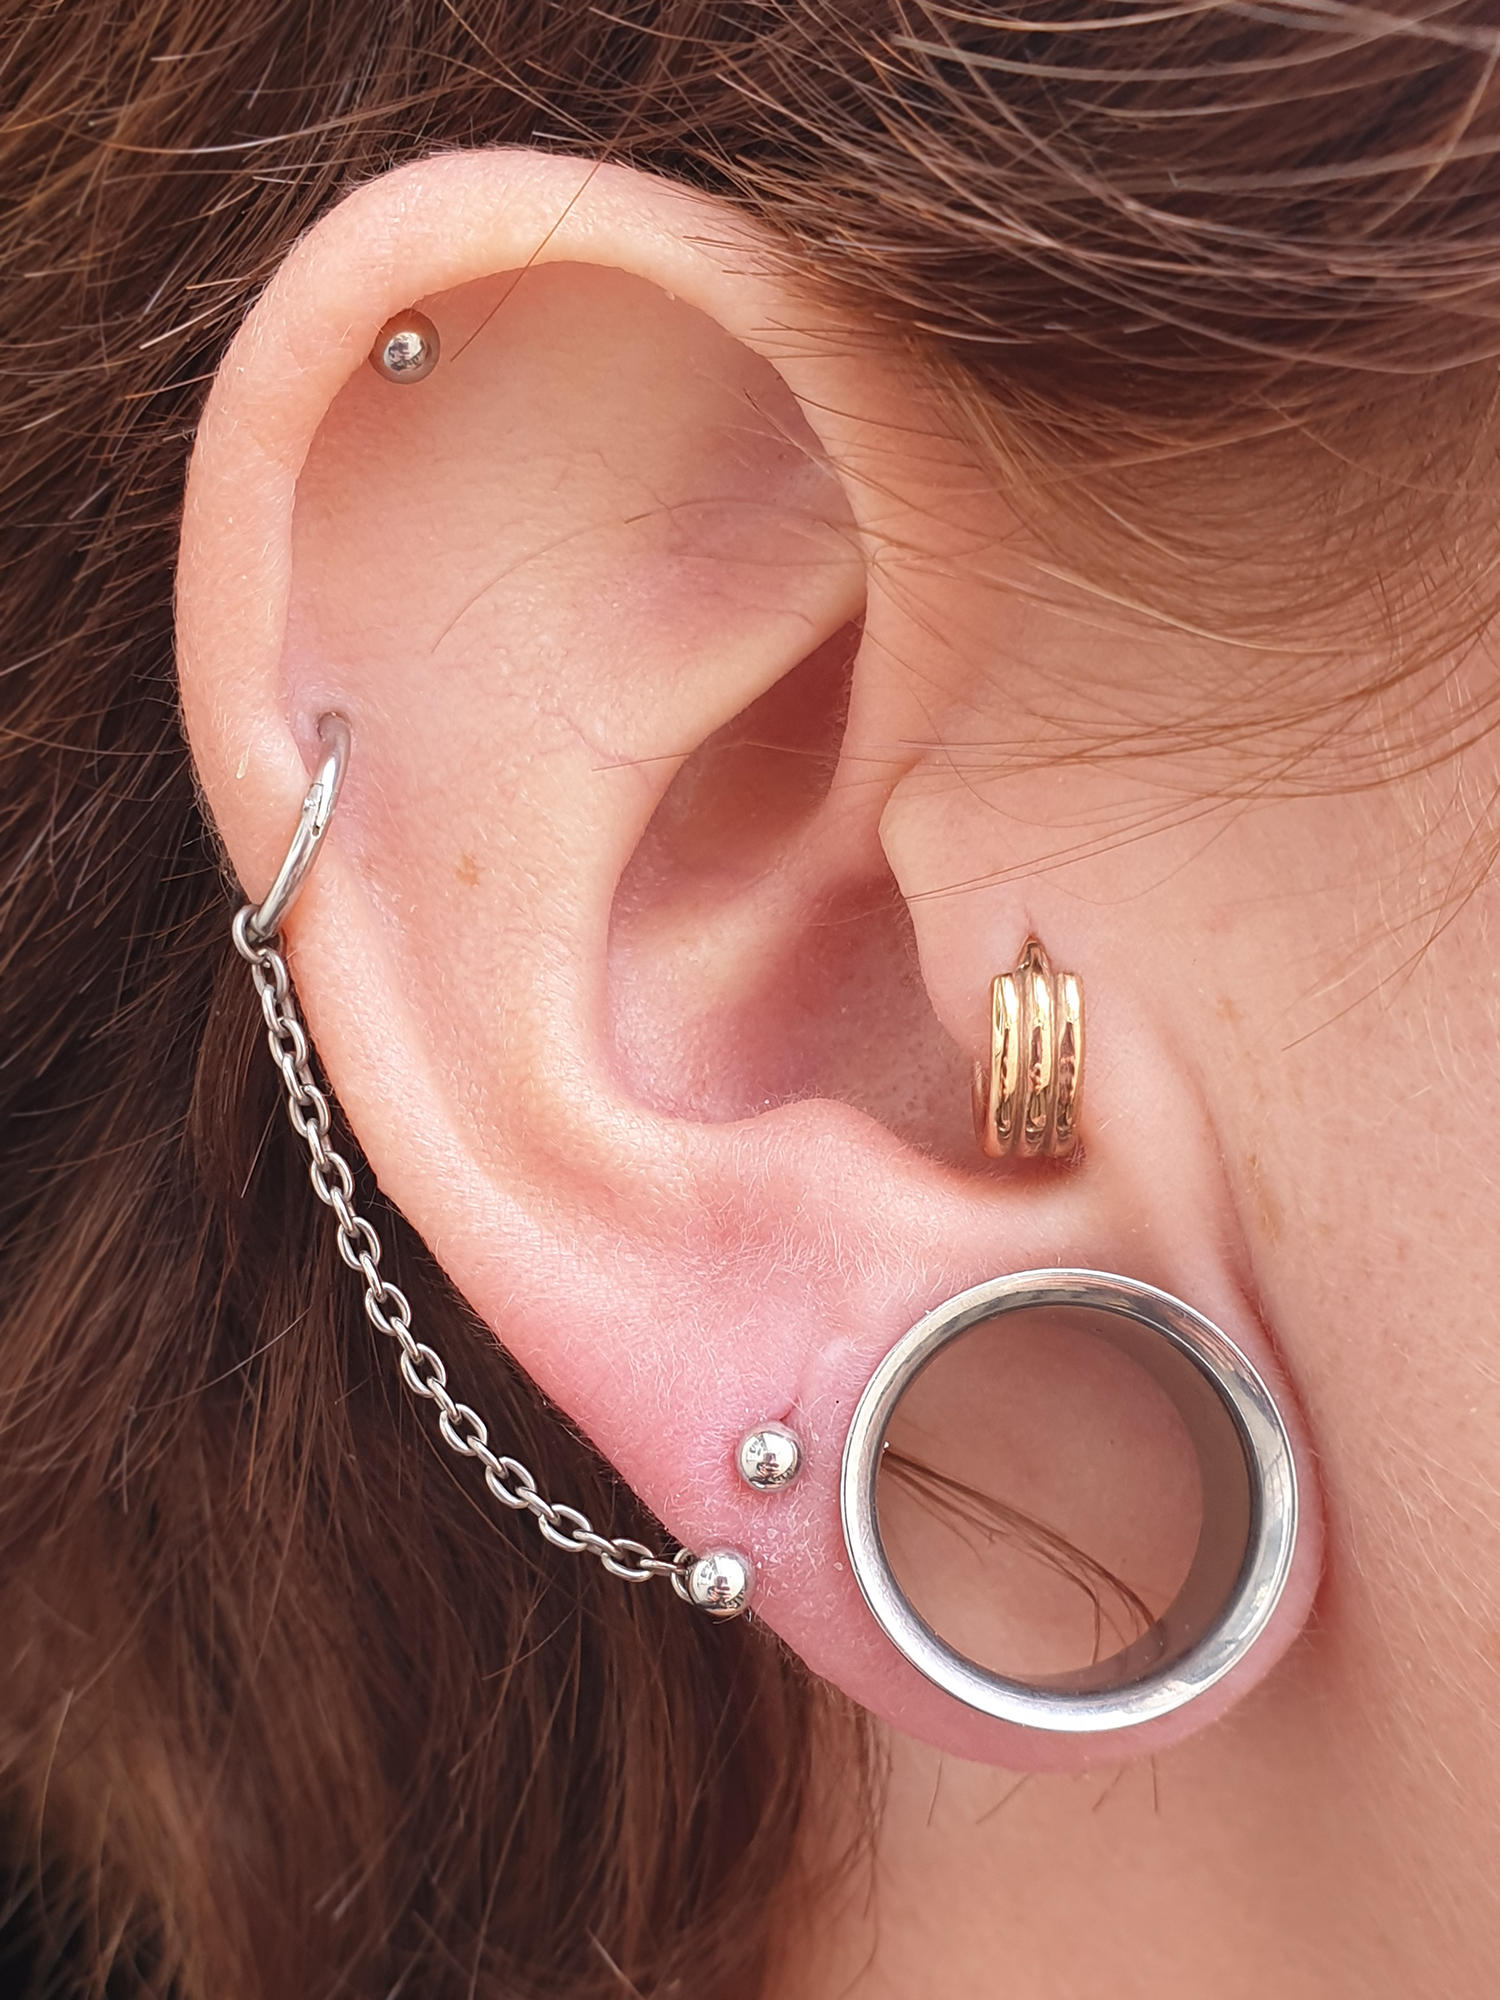 a stretched lobe wearing a titanium tunnel and then a helix and lobe piercing joined together with a silver chain